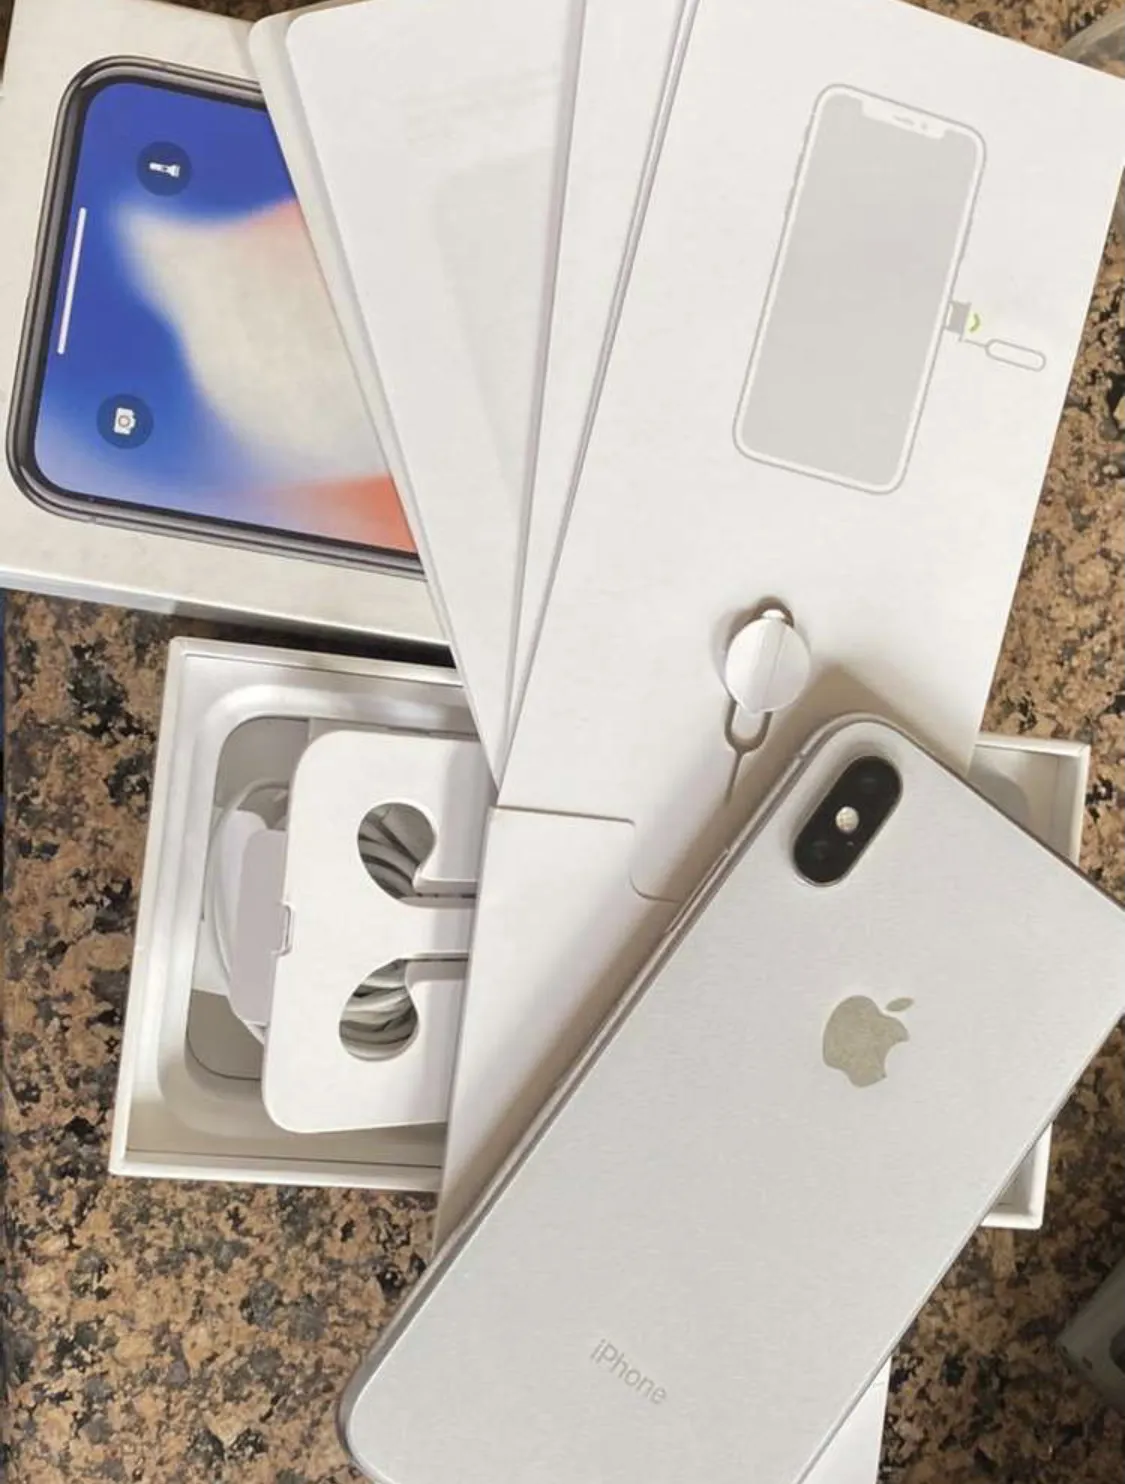 Iphone x 64gb in silver/white - photo 3